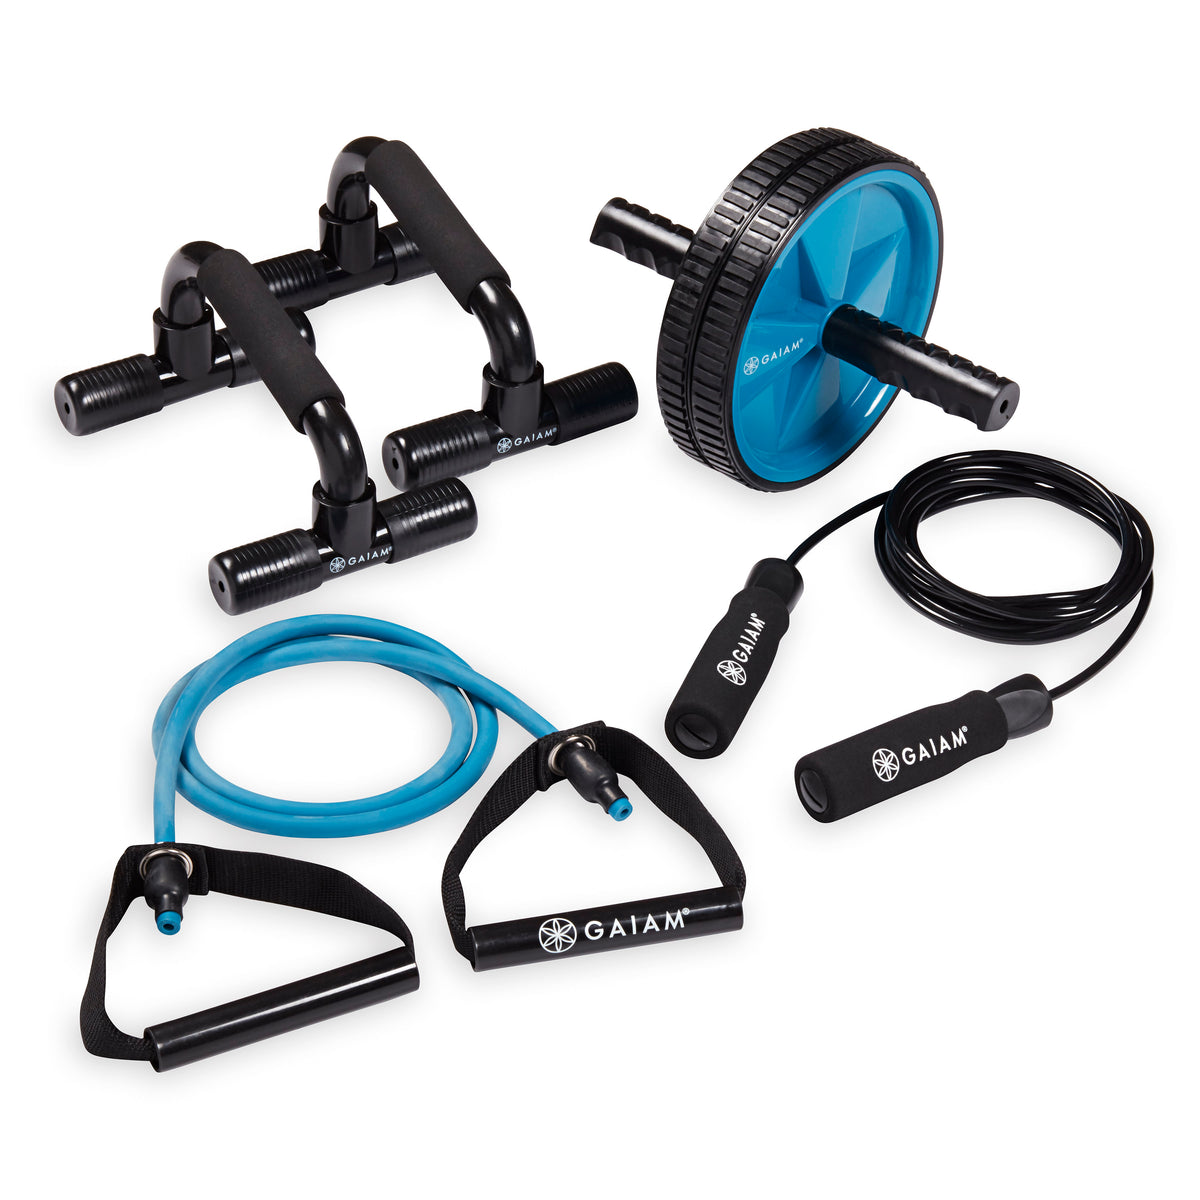 Home Gym Cycle Combo With Other Fitness Equipment Accessories - Complete  Home Gym Kit (SNK FITNESS Home Gym Combo Offer)